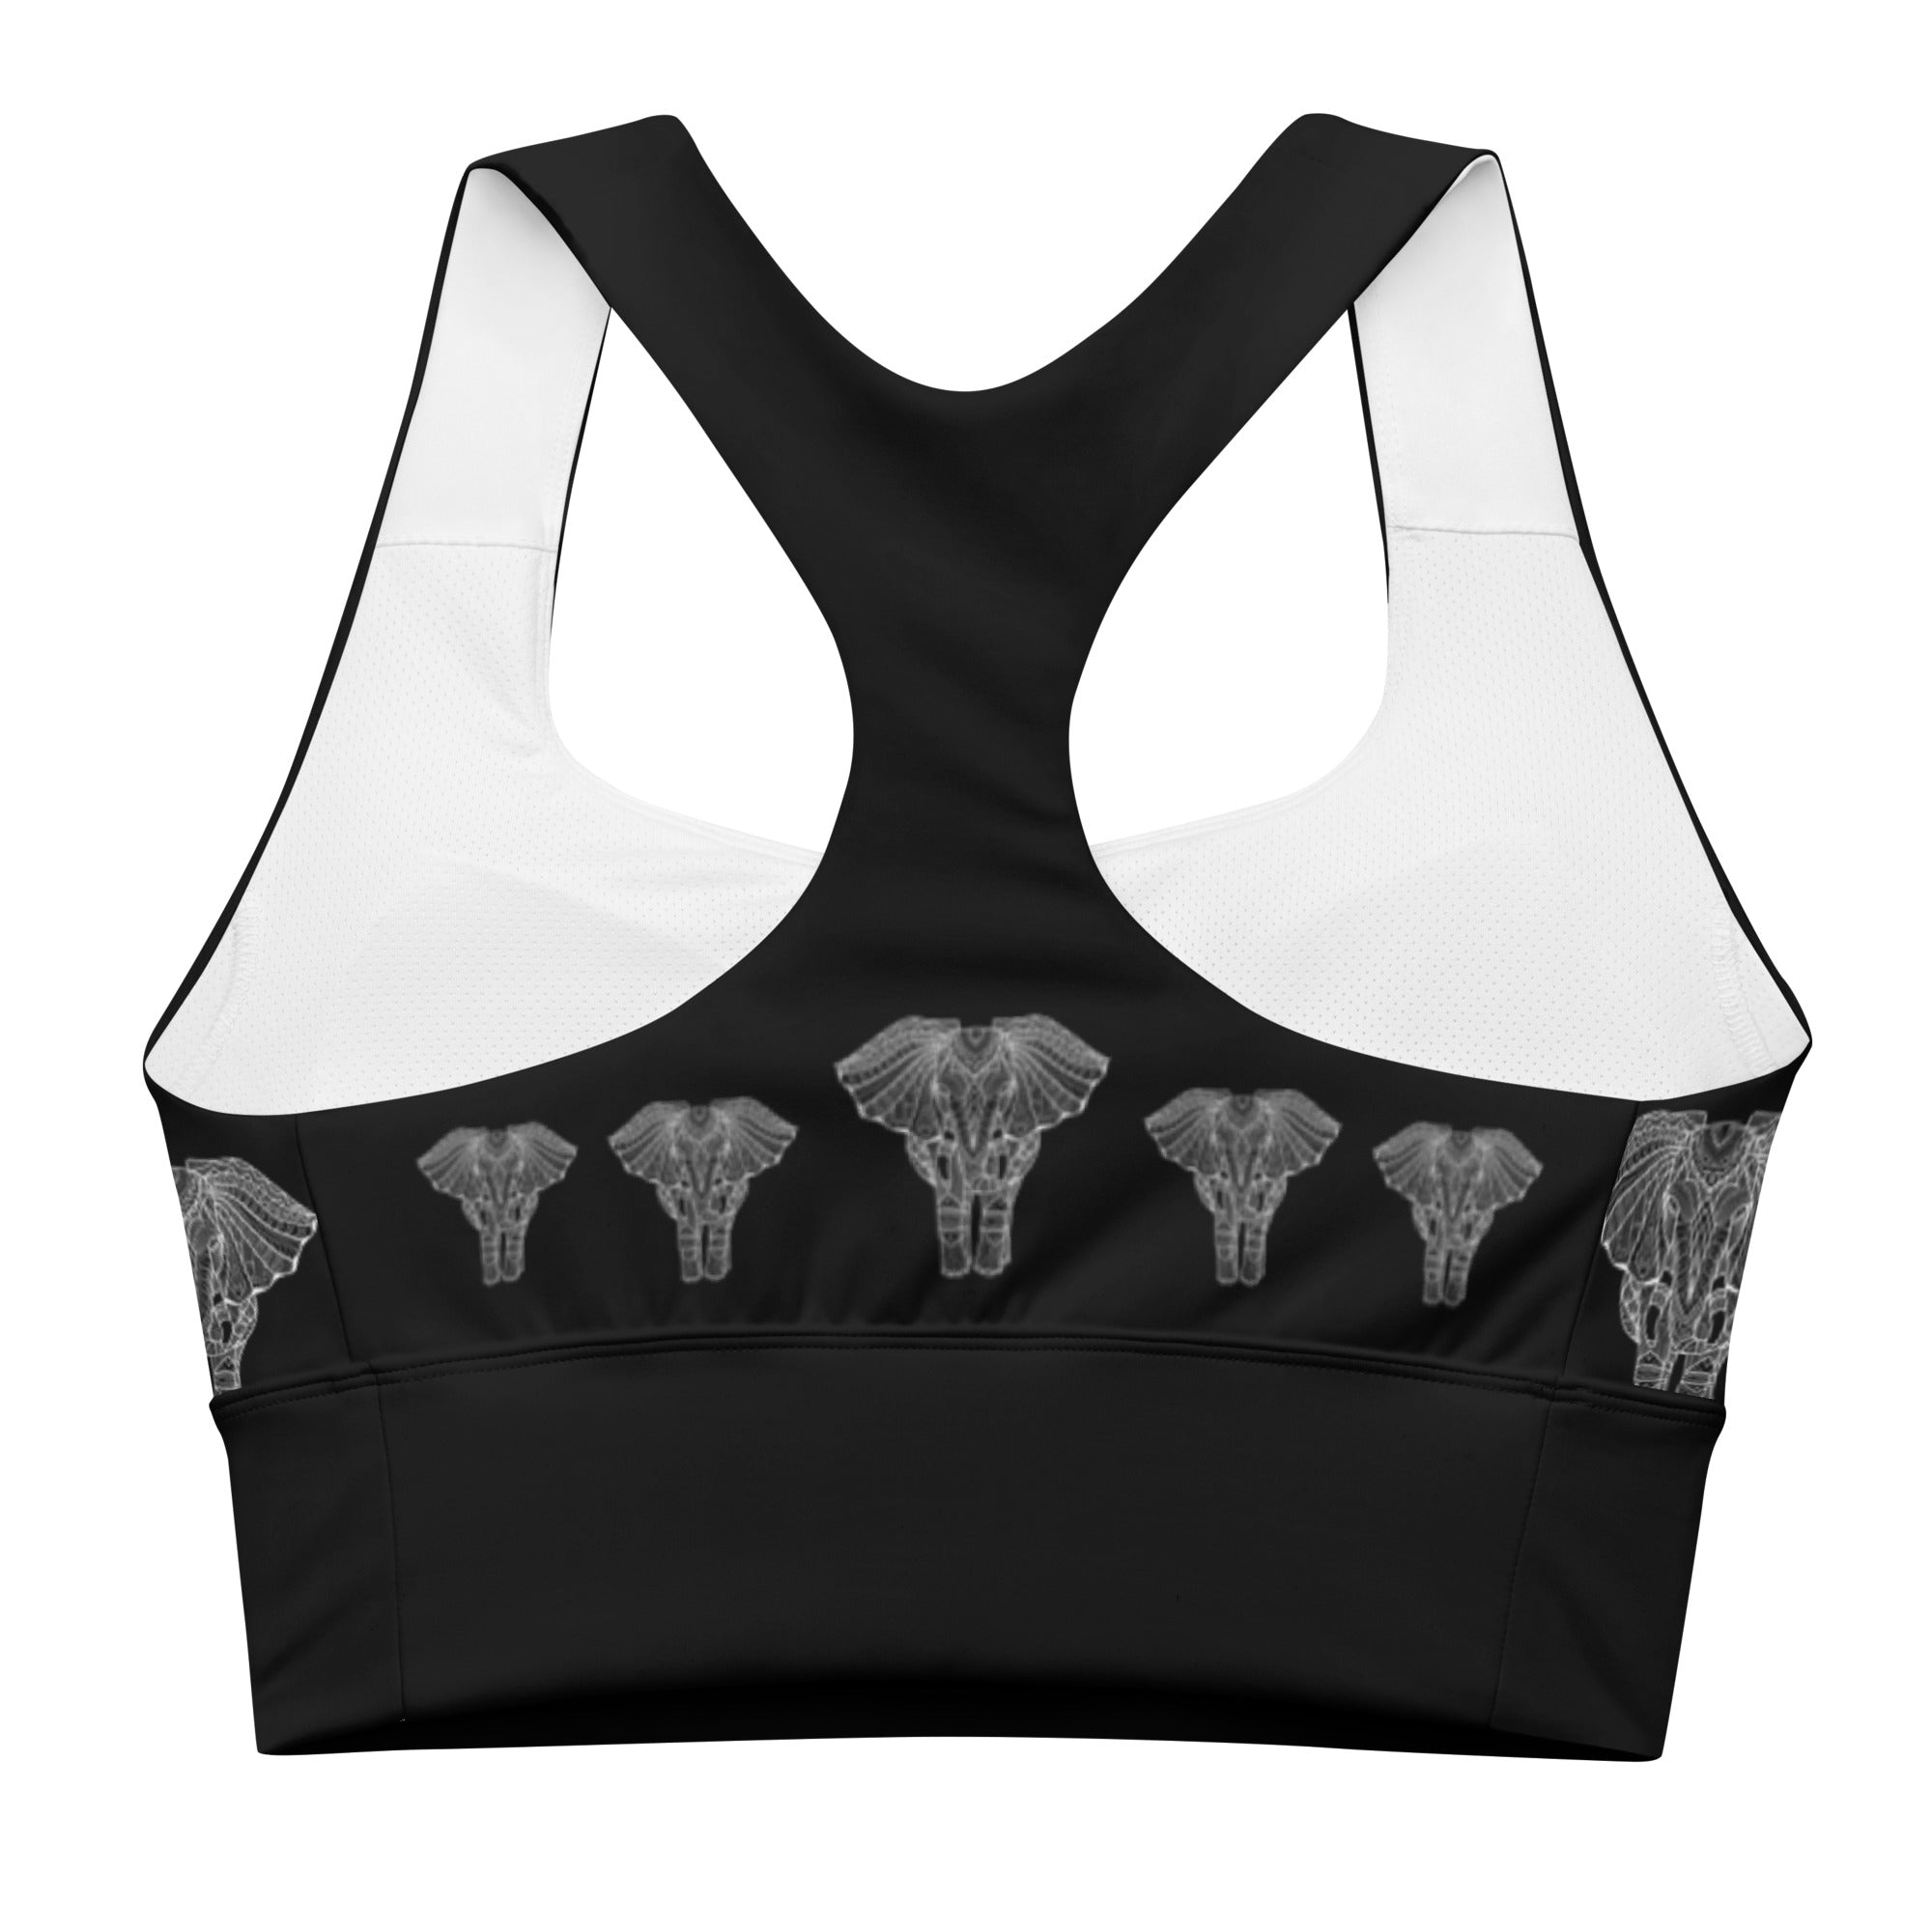 Crafted from high-quality materials, this sports bra offers exceptional comfort and stability during workouts. 